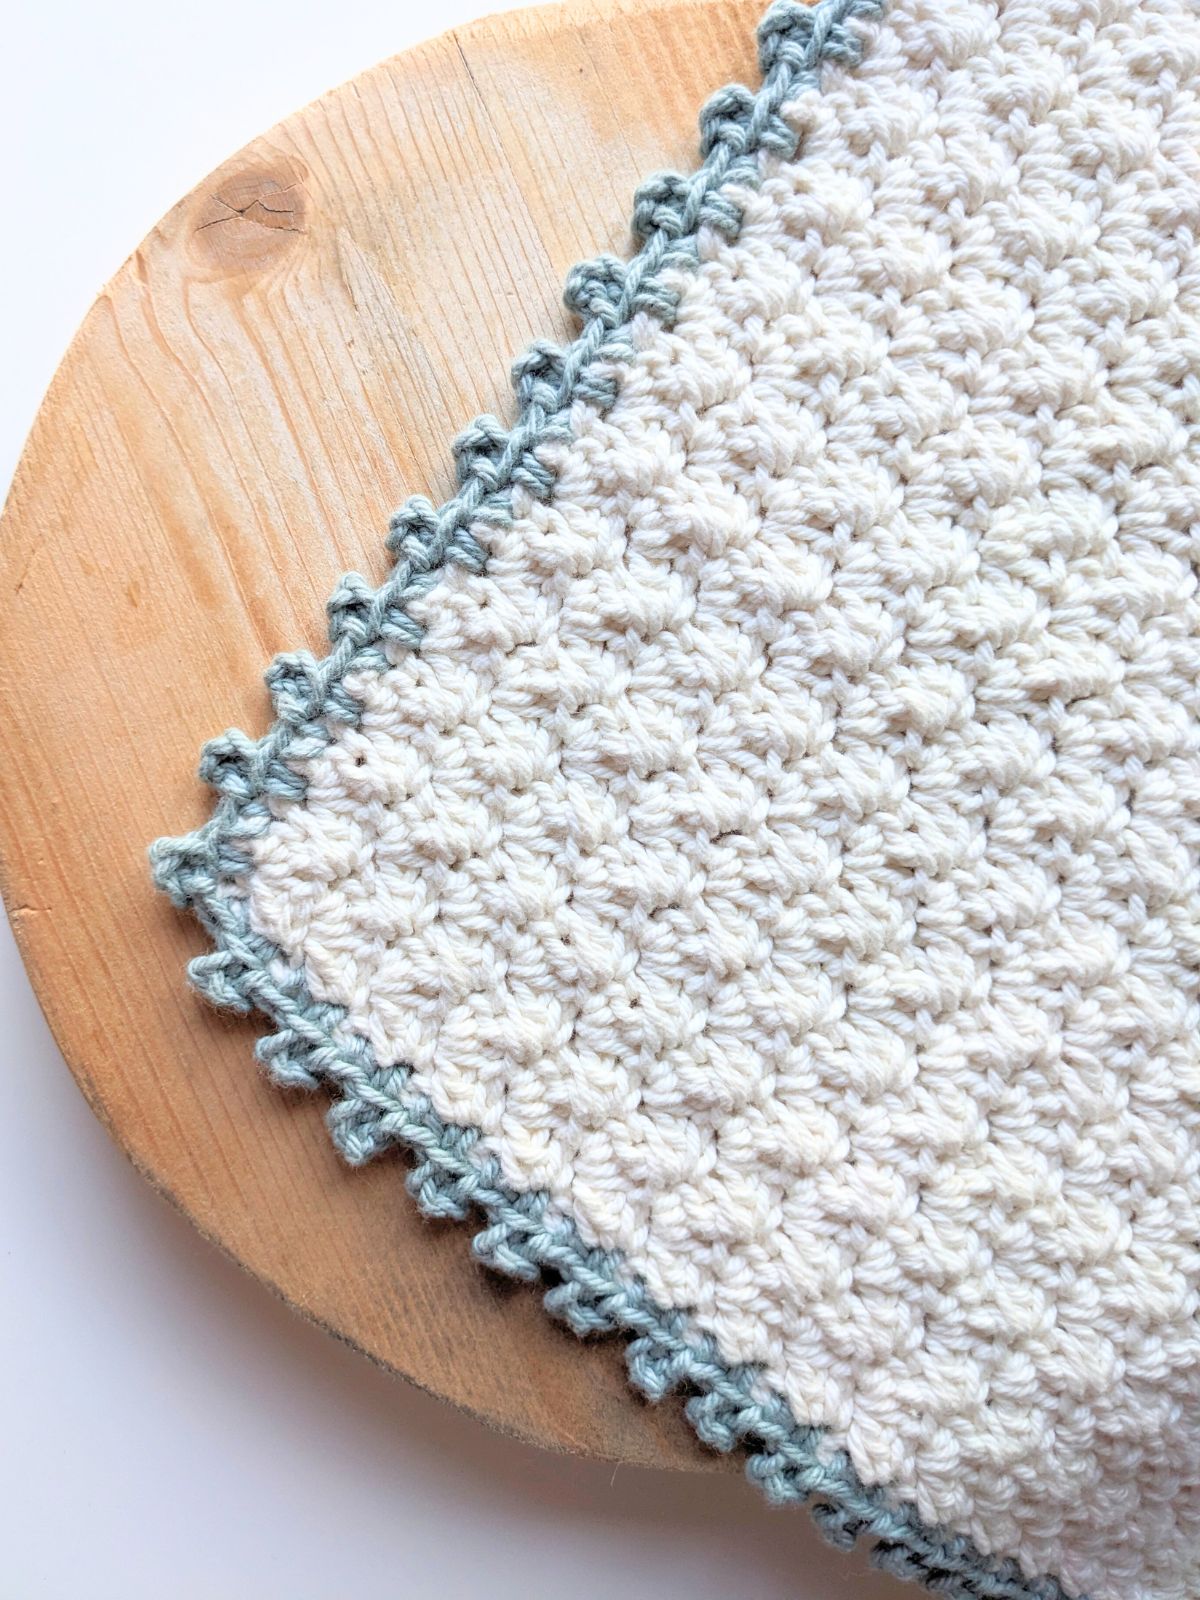 A crochet swatch with a picot stitch border.